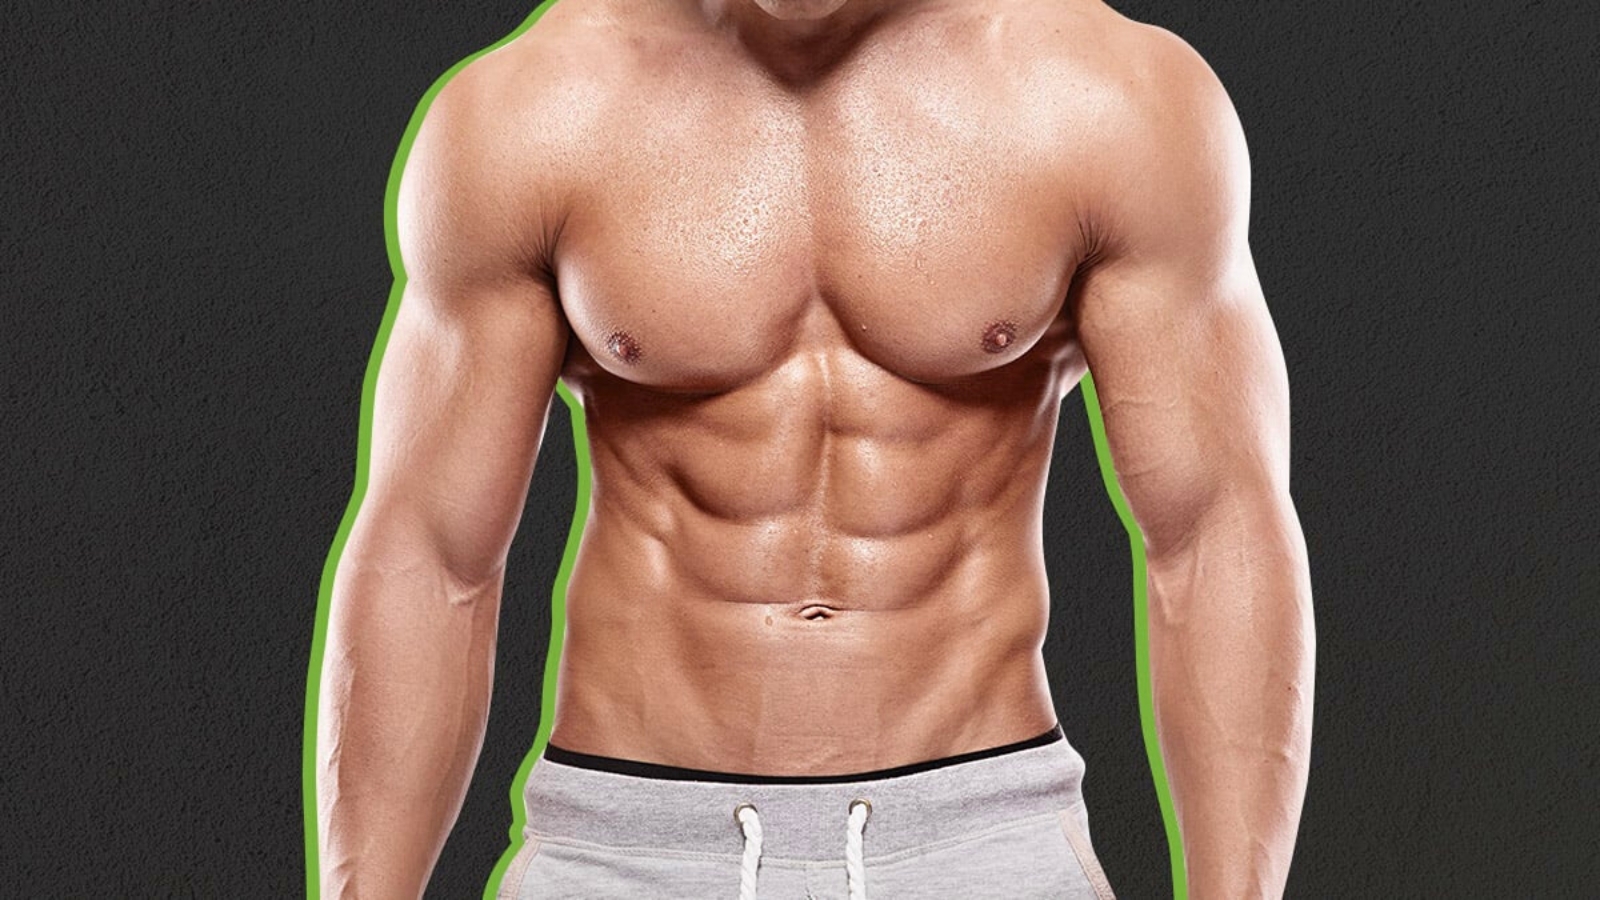 Combining Core Strength With Abdominal Exercises to Get Those 6-Pack A